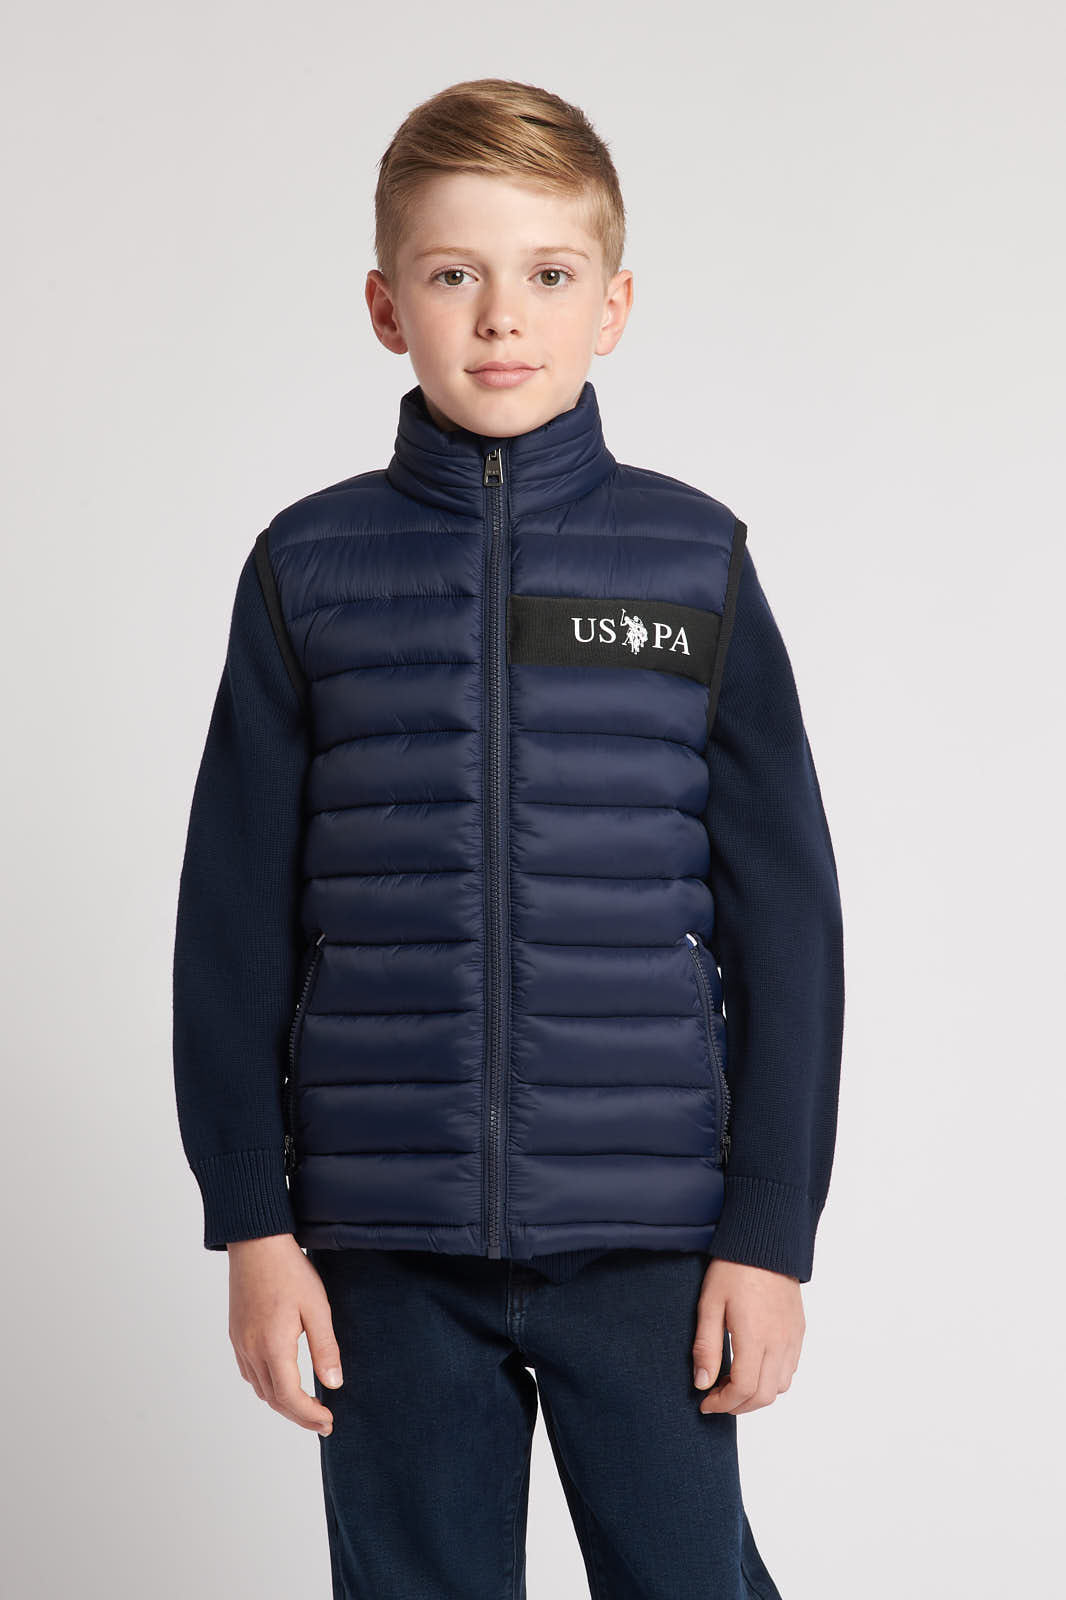 U.S. Polo Assn. Boys Lightweight Quilted Tape Gilet in Navy Blue